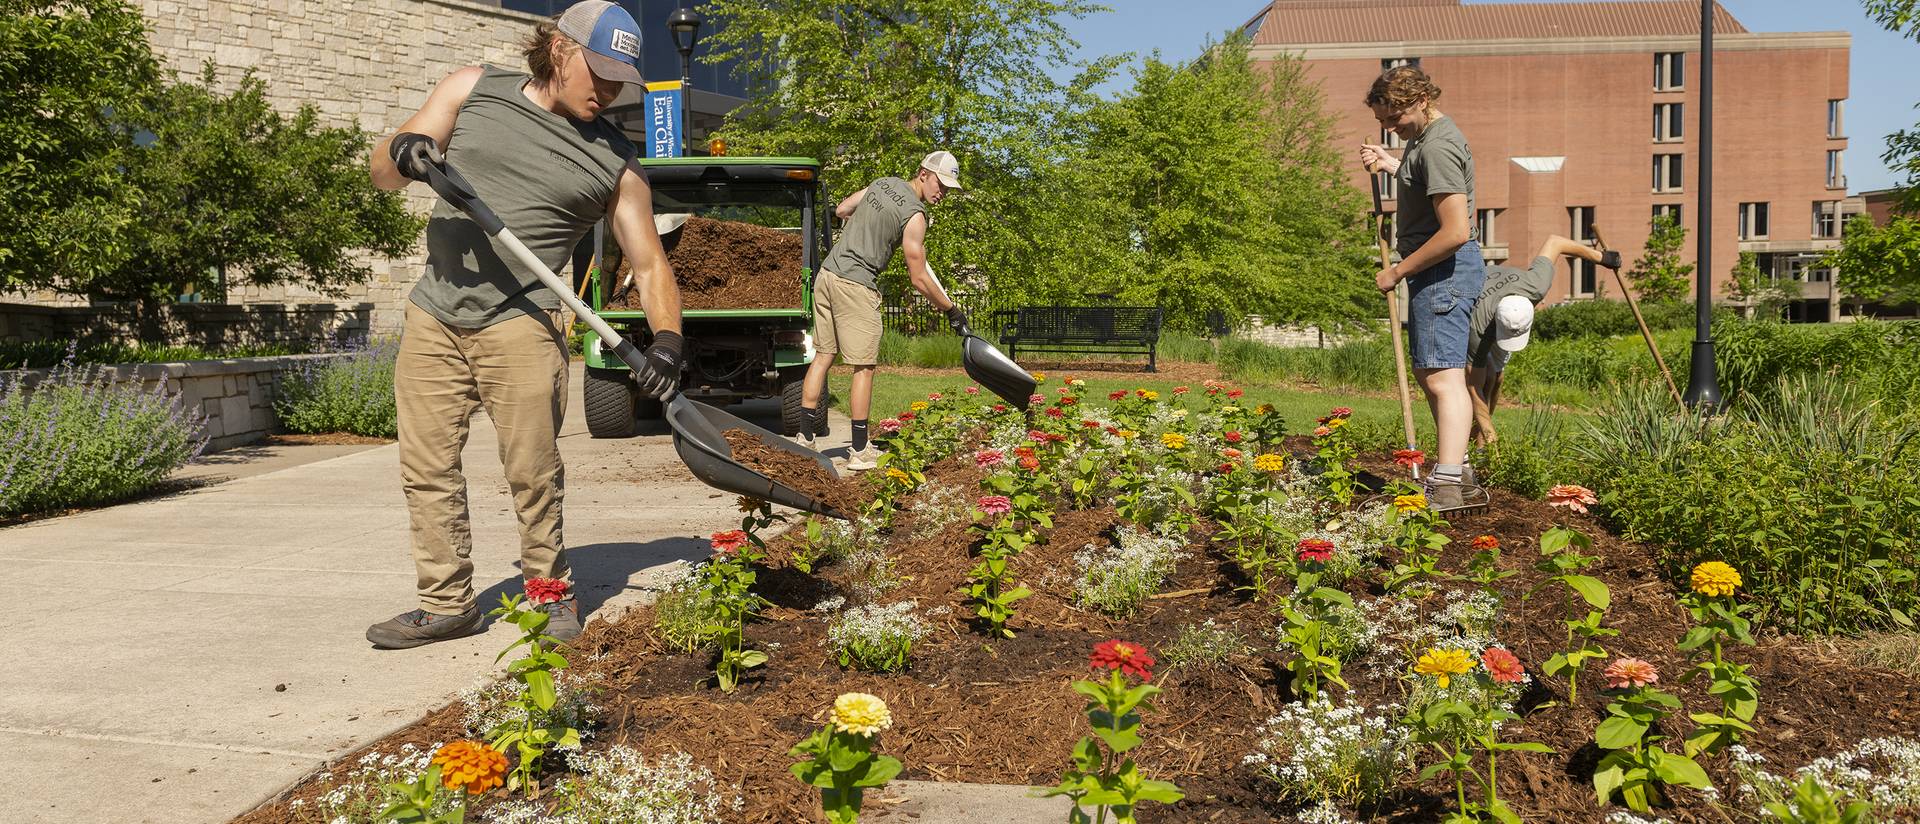 UW-Eau Claire grounds crew working on a flower bed.